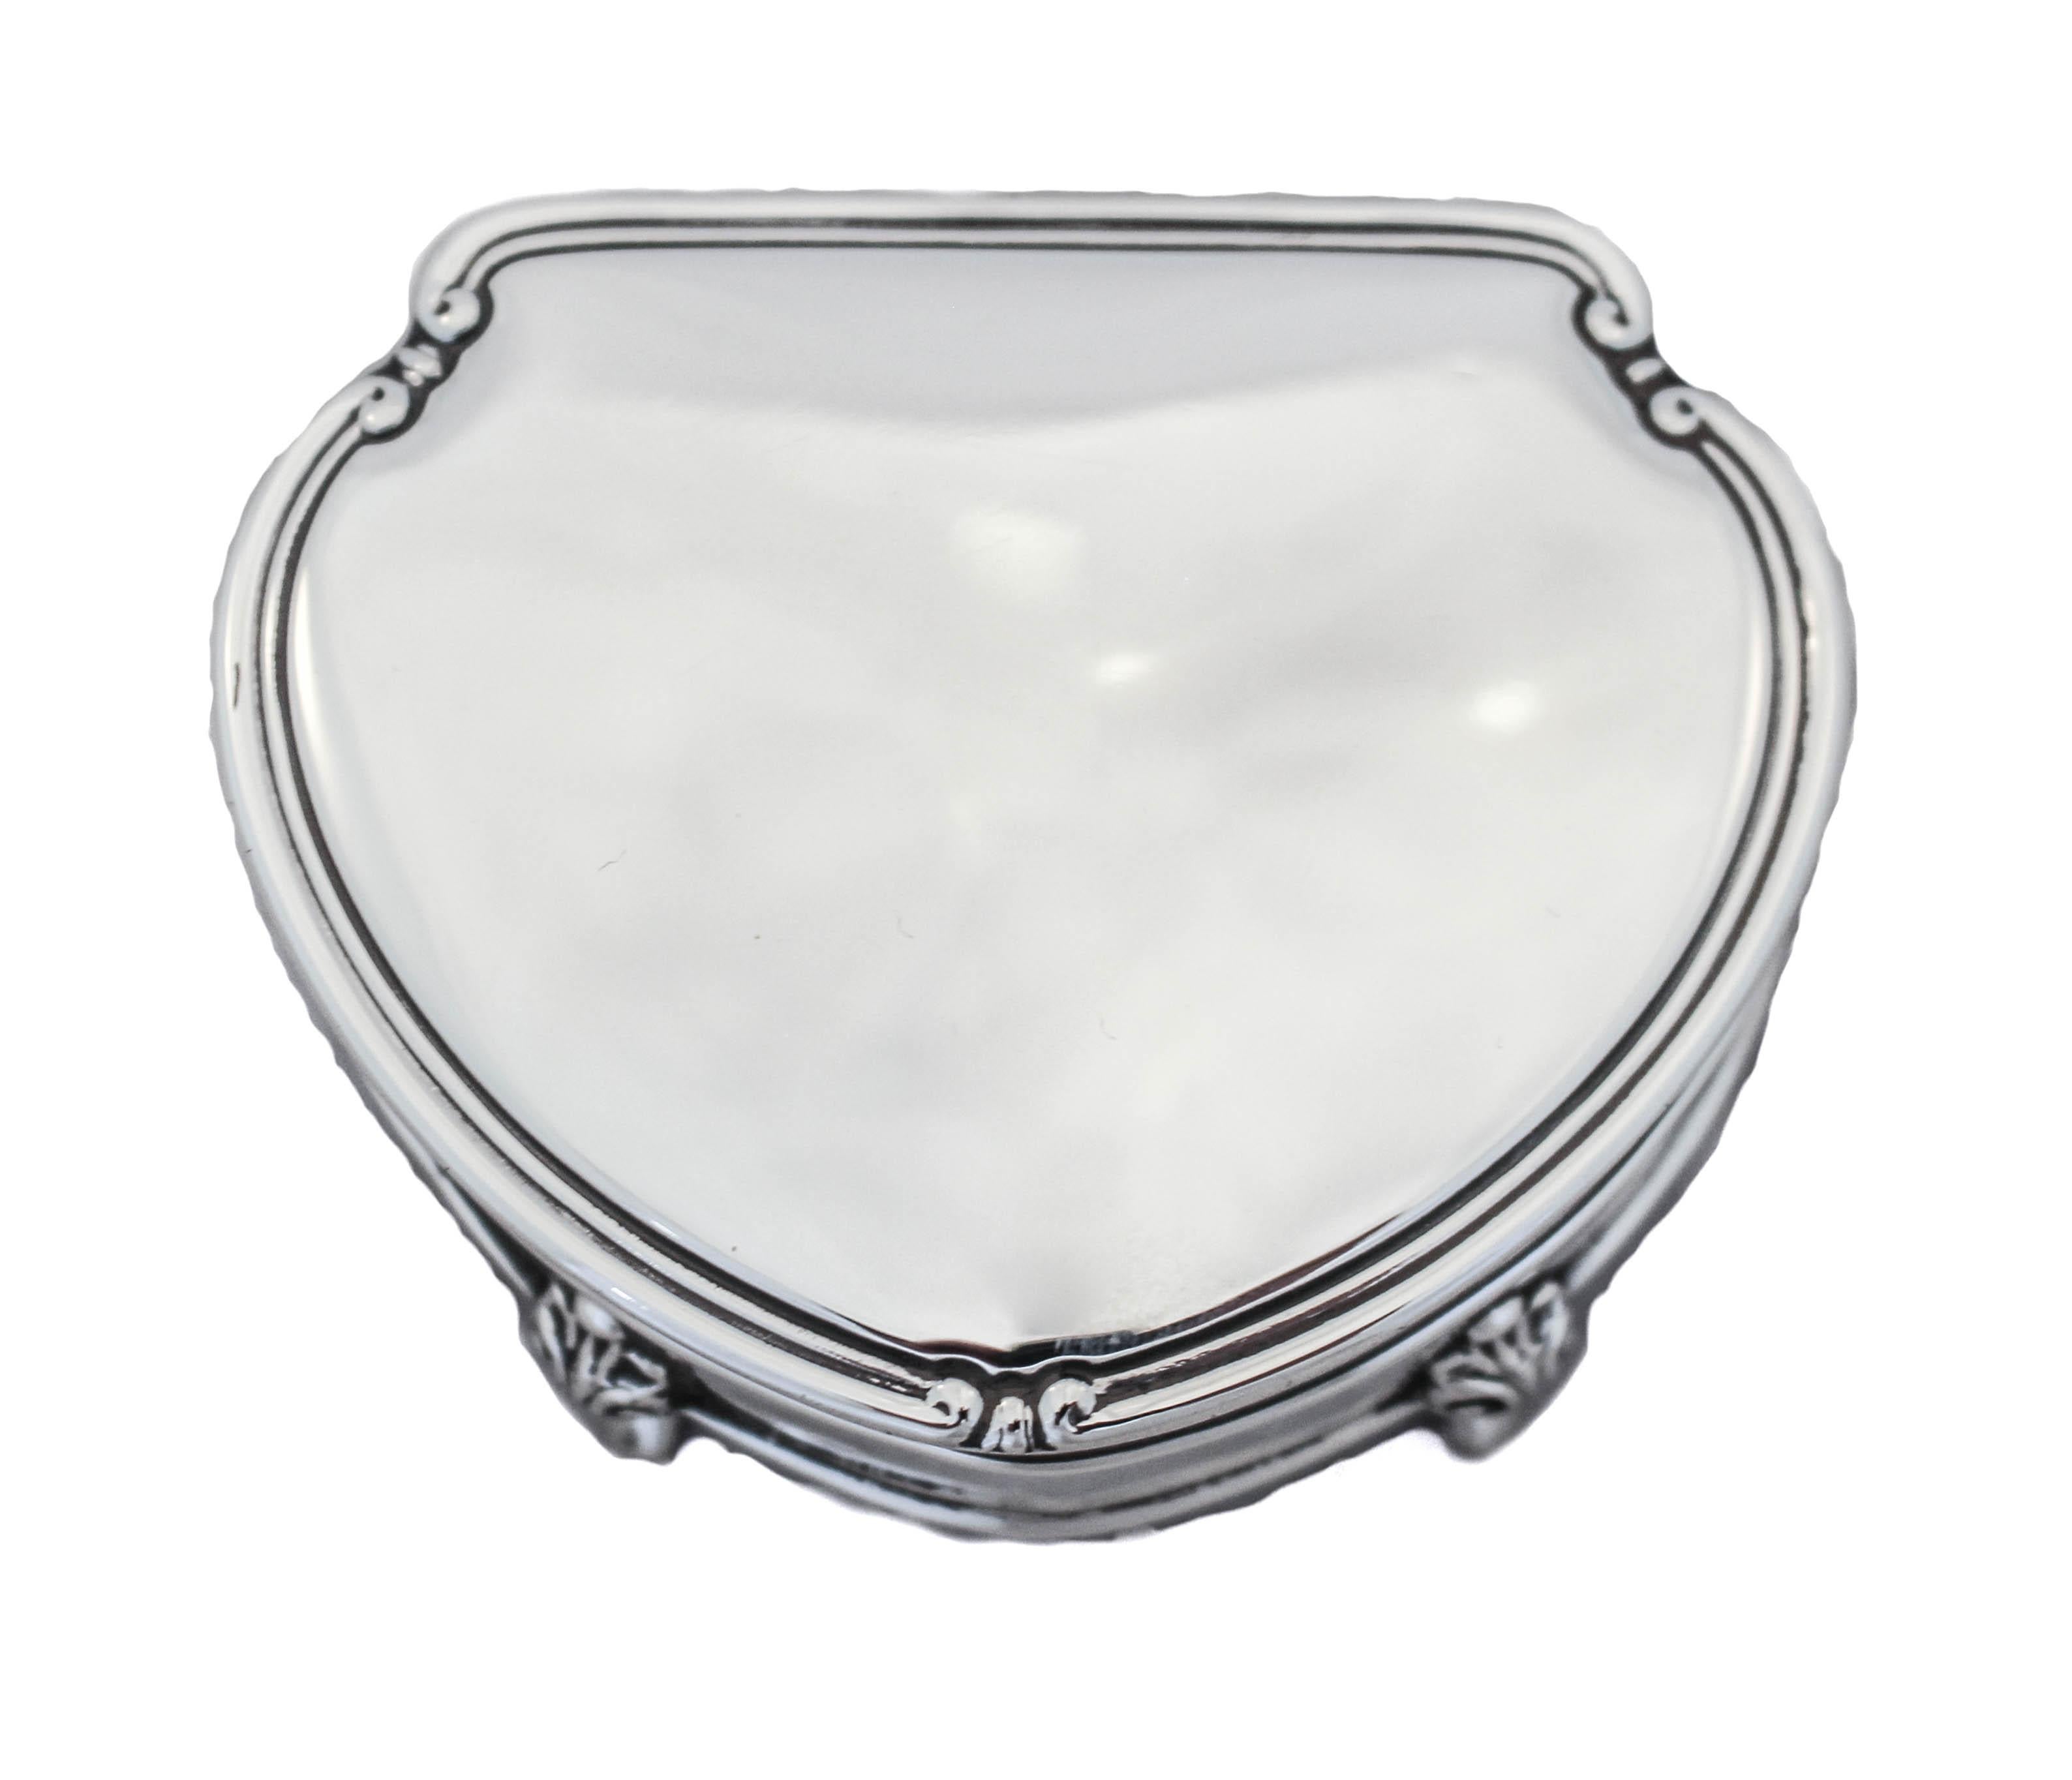 This sterling silver ring box was made in England in the late 19th century. It stands on 4 legs so it’s propped off the surface. The lining is original to the piece because we chose to maintain its authenticity. The lid open towards the back and is